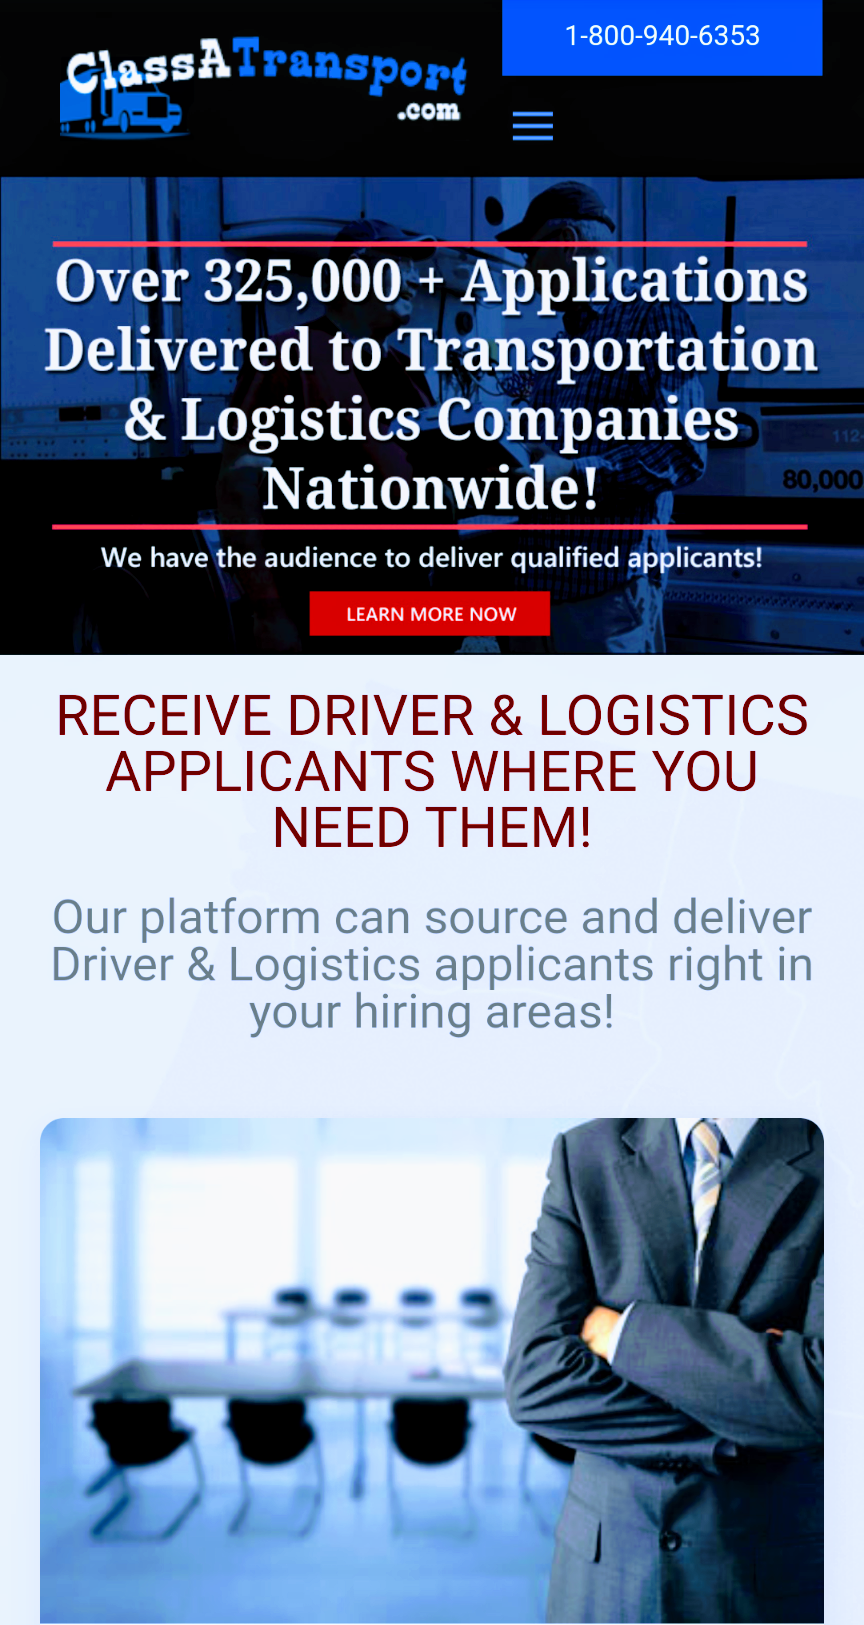 The Value of JobsinRigs.com and ClassATransport.com to the Transportation Industry - Bringing Employers and Employees together faster